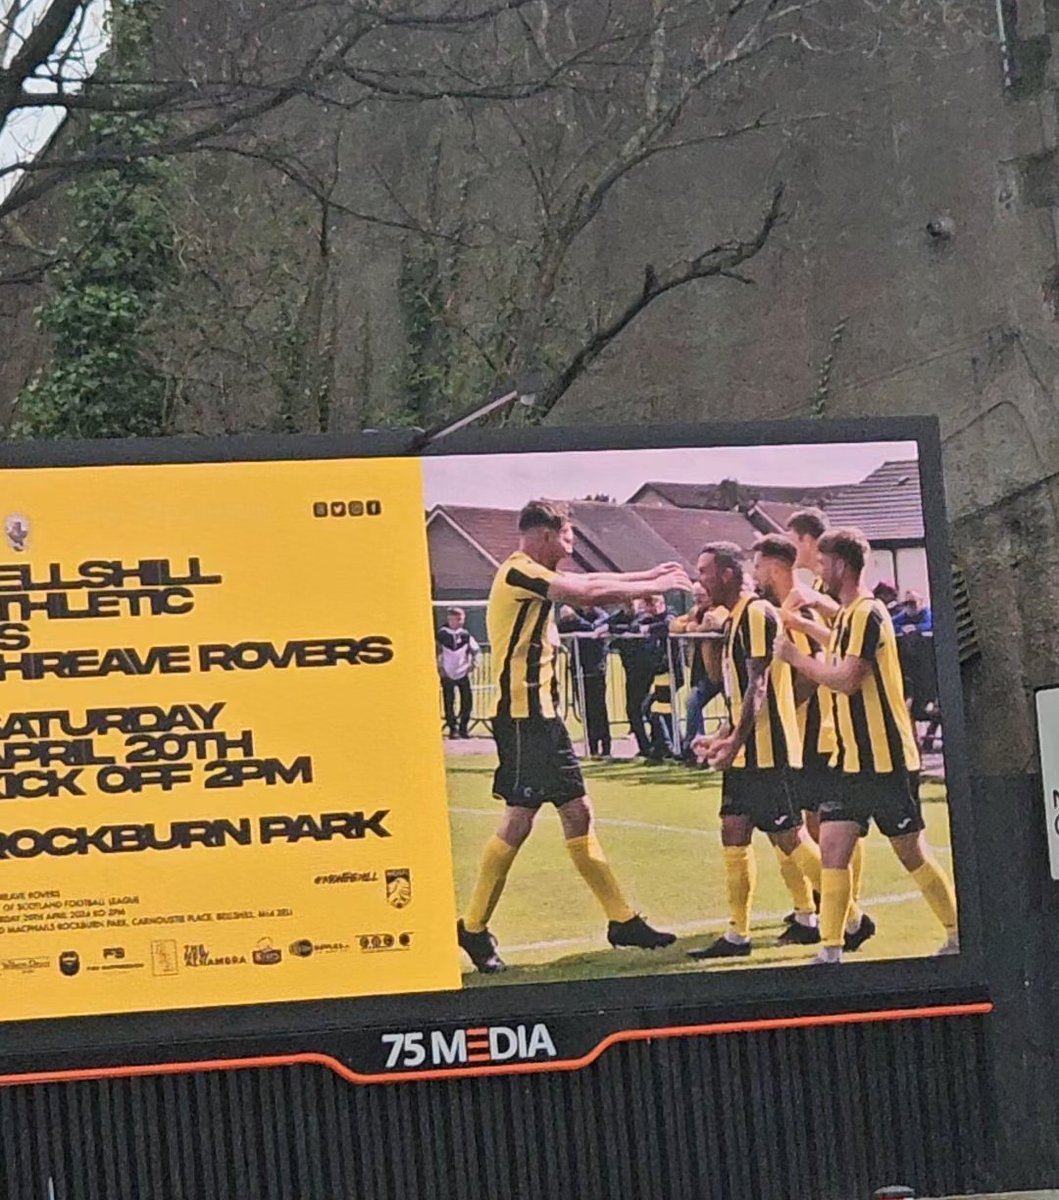 Great promotion for the @BellshillA1897 match coming up